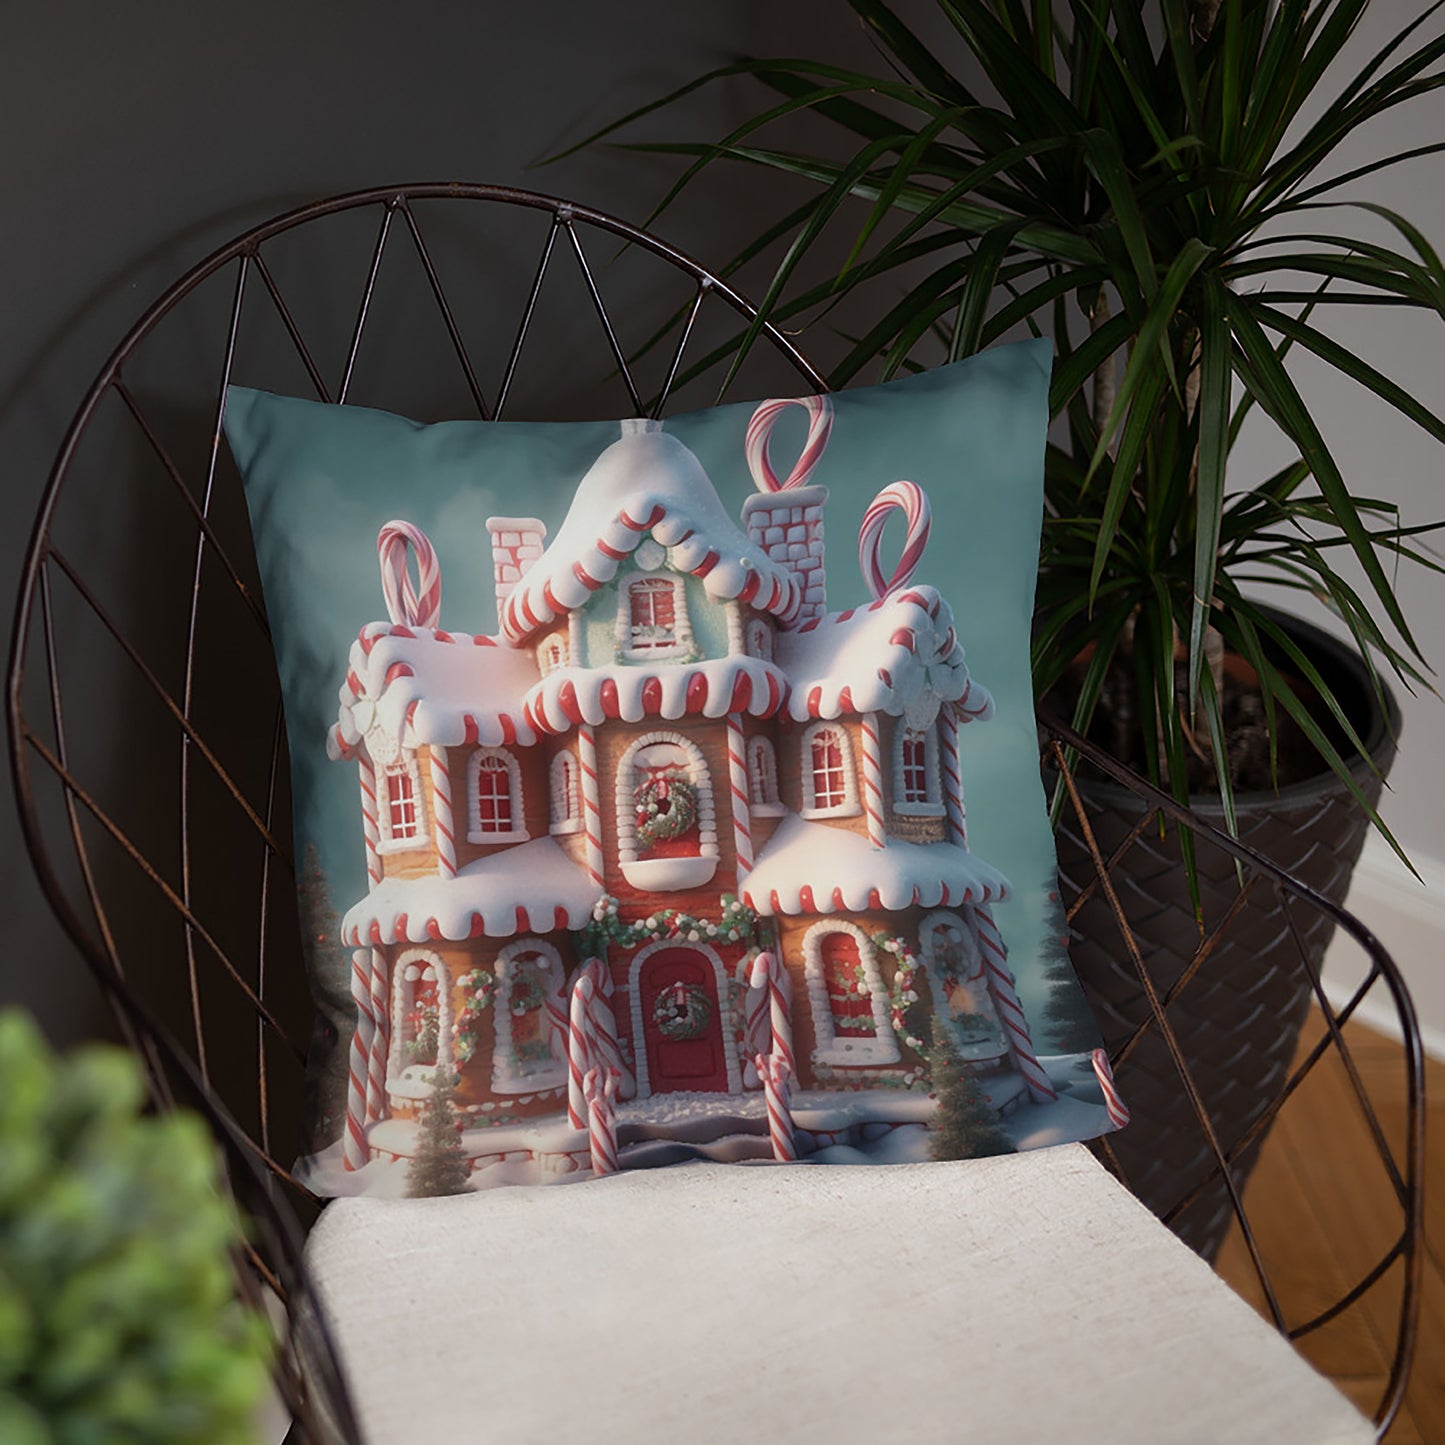 Christmas Throw Pillow Gingerbread Dream Delight Polyester Decorative Cushion 18x18